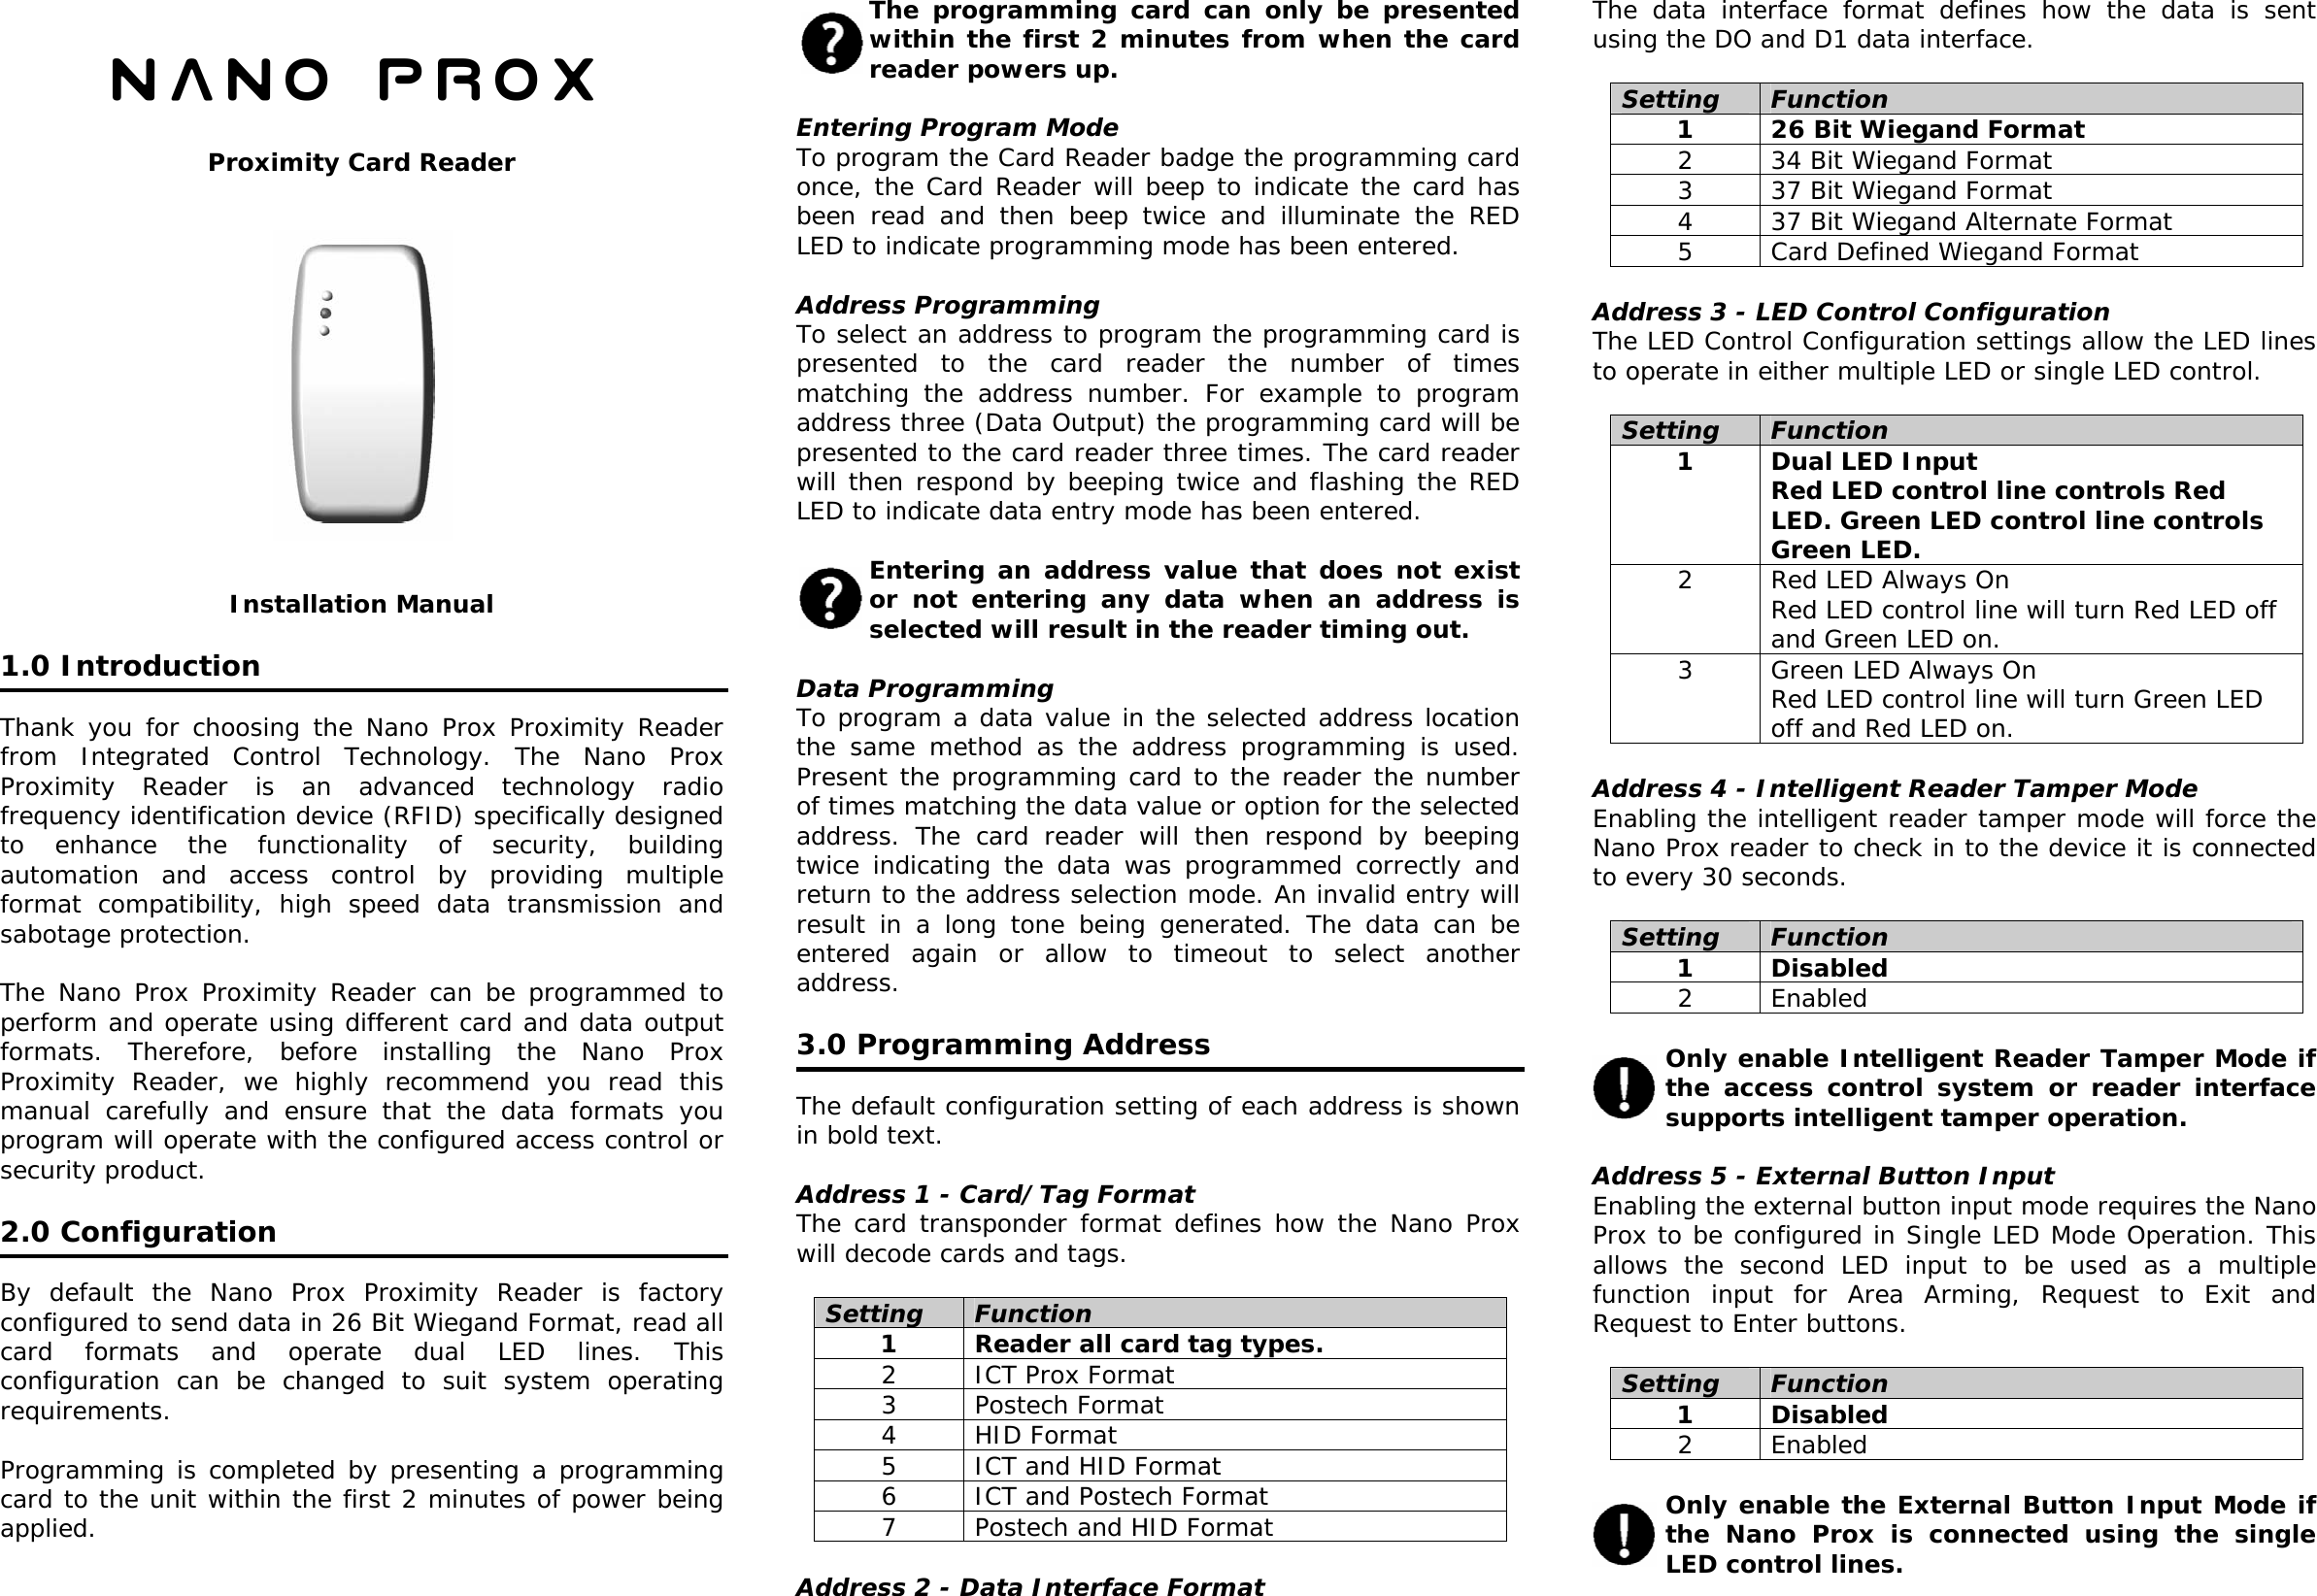   Nano PROX  Proximity Card Reader               Installation Manual  1.0 Introduction  Thank you for choosing the Nano Prox Proximity Reader from Integrated Control Technology. The Nano Prox Proximity Reader is an advanced technology radio frequency identification device (RFID) specifically designed to enhance the functionality of security, building automation and access control by providing multiple format compatibility, high speed data transmission and sabotage protection.  The Nano Prox Proximity Reader can be programmed to perform and operate using different card and data output formats. Therefore, before installing the Nano Prox Proximity Reader, we highly recommend you read this manual carefully and ensure that the data formats you program will operate with the configured access control or security product.   2.0 Configuration  By default the Nano Prox Proximity Reader is factory configured to send data in 26 Bit Wiegand Format, read all card formats and operate dual LED lines. This configuration can be changed to suit system operating requirements.  Programming is completed by presenting a programming card to the unit within the first 2 minutes of power being applied.   The programming card can only be presented within the first 2 minutes from when the card reader powers up.  Entering Program Mode To program the Card Reader badge the programming card once, the Card Reader will beep to indicate the card has been read and then beep twice and illuminate the RED LED to indicate programming mode has been entered.  Address Programming To select an address to program the programming card is presented to the card reader the number of times matching the address number. For example to program address three (Data Output) the programming card will be presented to the card reader three times. The card reader will then respond by beeping twice and flashing the RED LED to indicate data entry mode has been entered.  Entering an address value that does not exist or not entering any data when an address is selected will result in the reader timing out.  Data Programming To program a data value in the selected address location the same method as the address programming is used. Present the programming card to the reader the number of times matching the data value or option for the selected address. The card reader will then respond by beeping twice indicating the data was programmed correctly and return to the address selection mode. An invalid entry will result in a long tone being generated. The data can be entered again or allow to timeout to select another address.  3.0 Programming Address  The default configuration setting of each address is shown in bold text.  Address 1 - Card/Tag Format The card transponder format defines how the Nano Prox will decode cards and tags.  Setting  Function 1  Reader all card tag types. 2  ICT Prox Format  3 Postech Format 4 HID Format 5  ICT and HID Format 6  ICT and Postech Format 7  Postech and HID Format  Address 2 - Data Interface Format The data interface format defines how the data is sent using the DO and D1 data interface.  Setting  Function 1  26 Bit Wiegand Format 2  34 Bit Wiegand Format 3  37 Bit Wiegand Format 4  37 Bit Wiegand Alternate Format 5  Card Defined Wiegand Format  Address 3 - LED Control Configuration The LED Control Configuration settings allow the LED lines to operate in either multiple LED or single LED control.  Setting  Function 1  Dual LED Input Red LED control line controls Red LED. Green LED control line controls Green LED. 2  Red LED Always On Red LED control line will turn Red LED off and Green LED on. 3  Green LED Always On Red LED control line will turn Green LED off and Red LED on.  Address 4 - Intelligent Reader Tamper Mode Enabling the intelligent reader tamper mode will force the Nano Prox reader to check in to the device it is connected to every 30 seconds.  Setting  Function 1 Disabled 2 Enabled  Only enable Intelligent Reader Tamper Mode if the access control system or reader interface supports intelligent tamper operation.  Address 5 - External Button Input  Enabling the external button input mode requires the Nano Prox to be configured in Single LED Mode Operation. This allows the second LED input to be used as a multiple function input for Area Arming, Request to Exit and Request to Enter buttons.  Setting  Function 1 Disabled 2 Enabled  Only enable the External Button Input Mode if the Nano Prox is connected using the single LED control lines.  